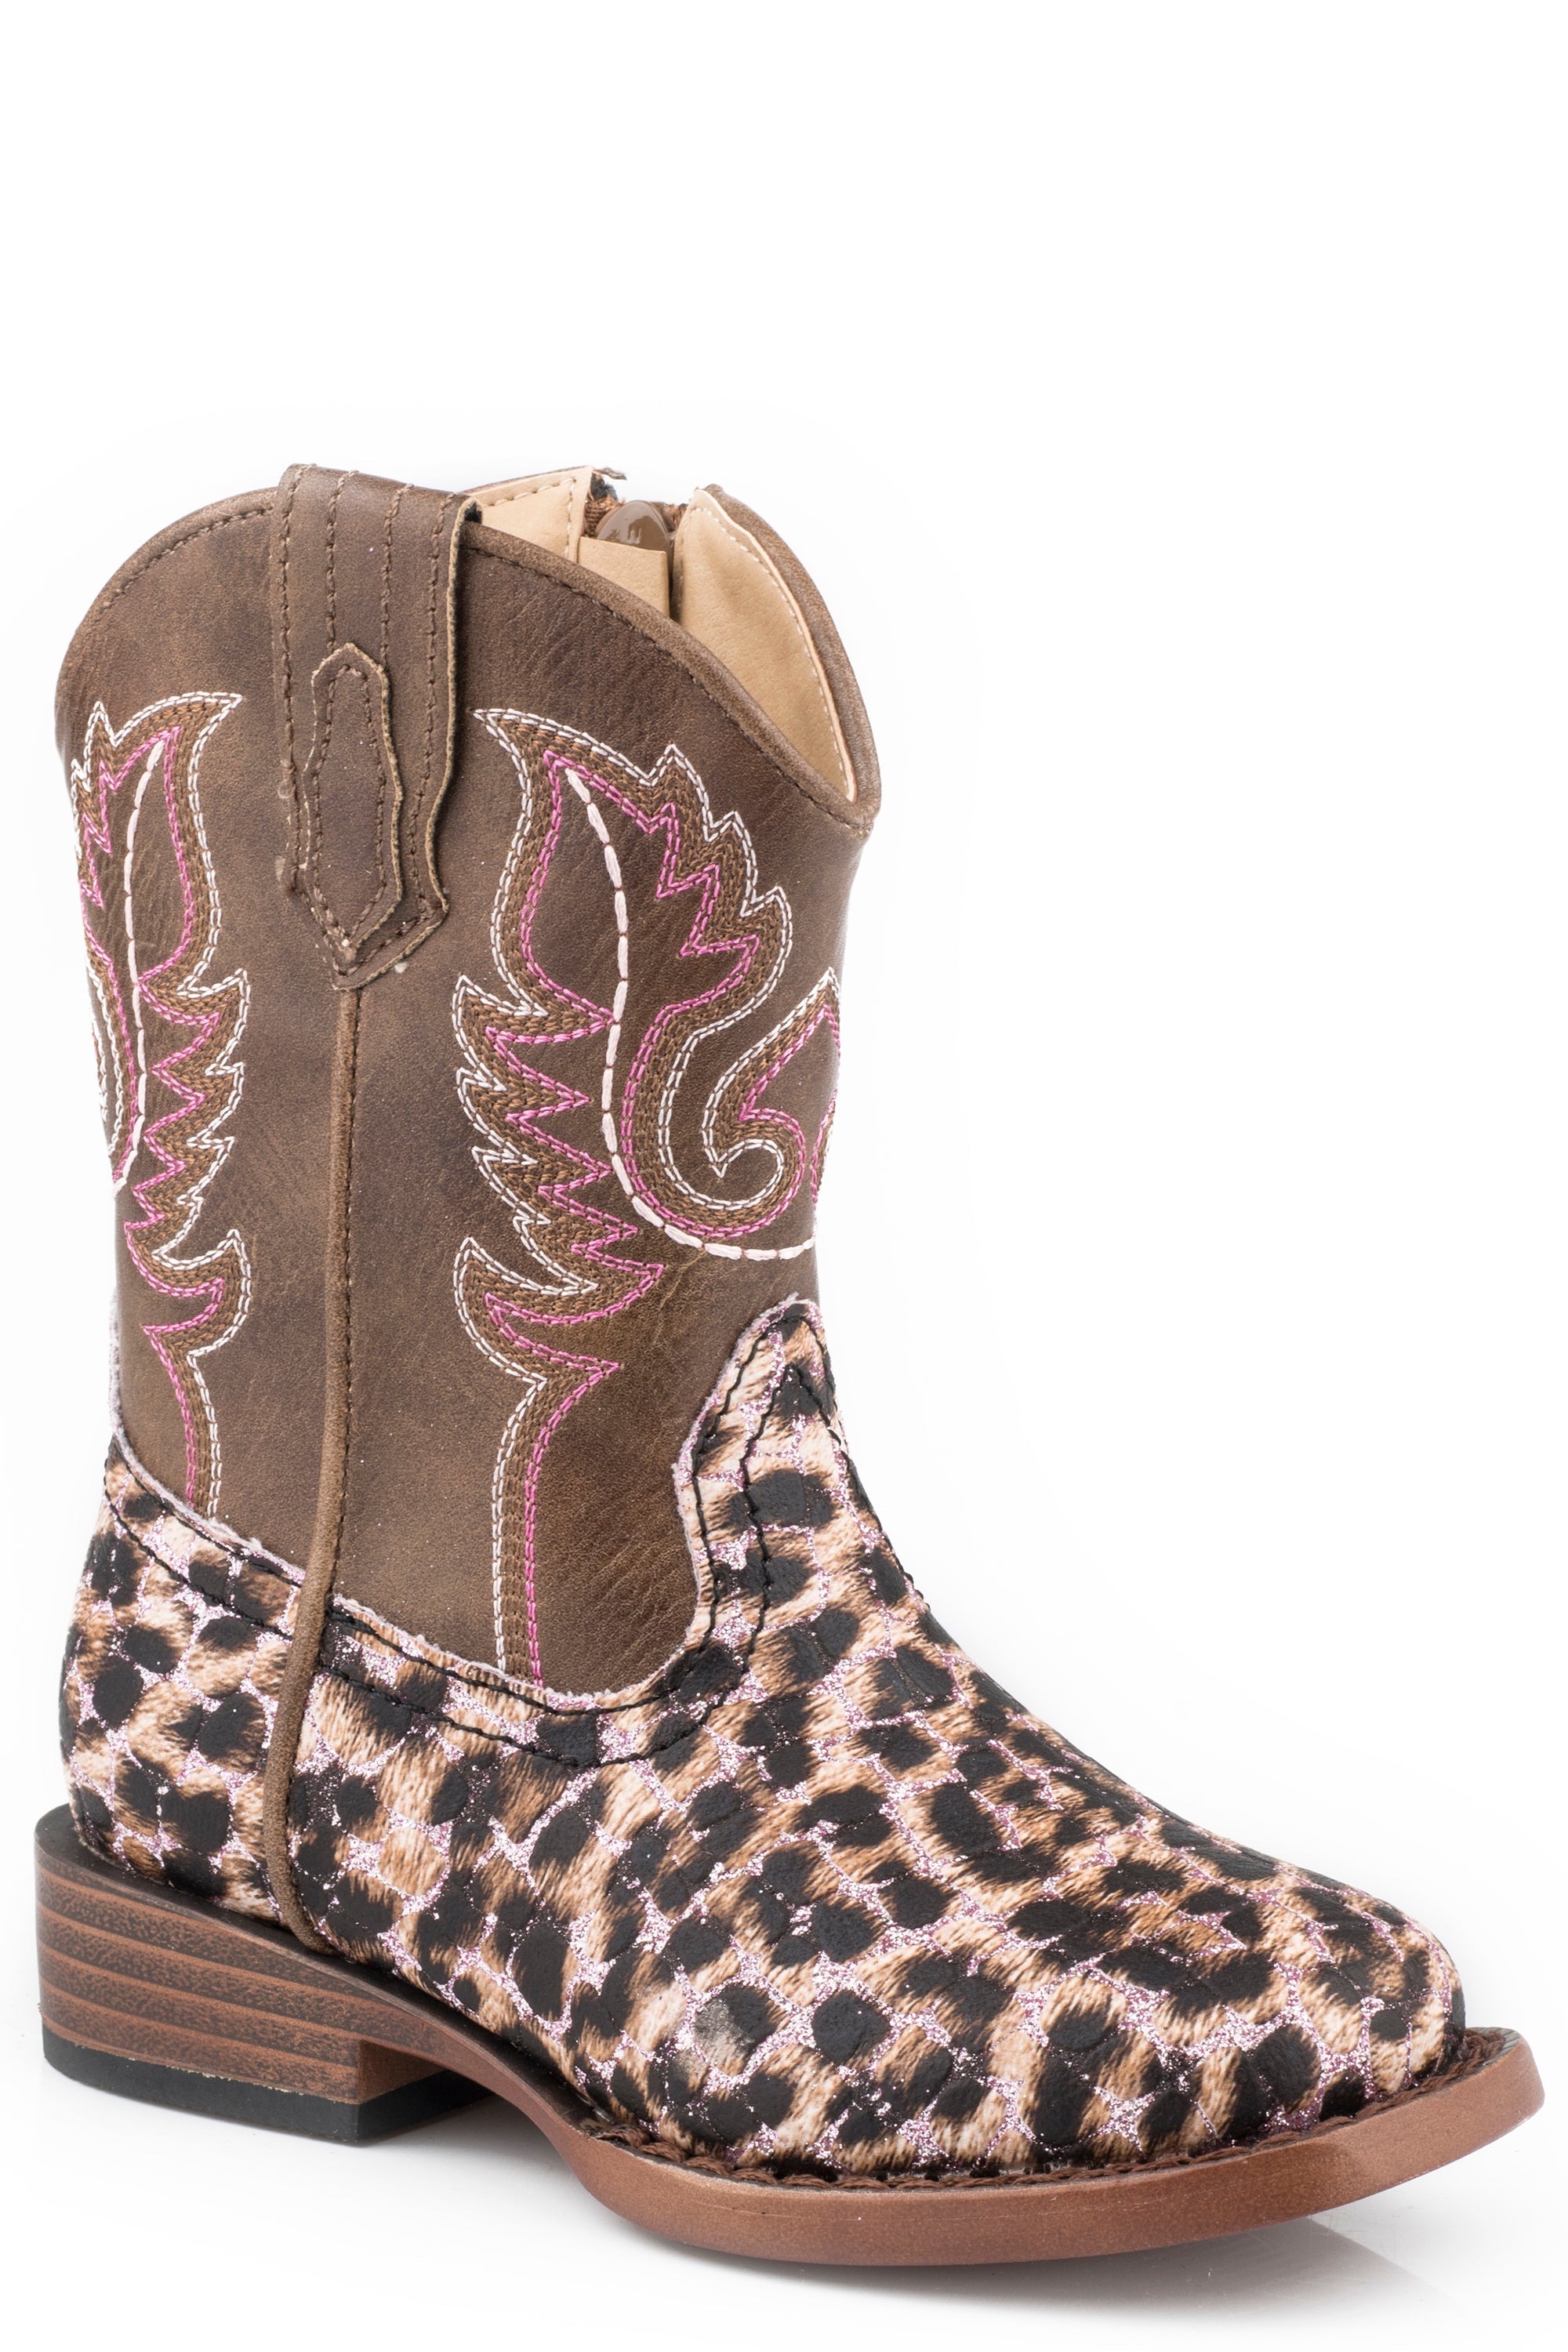 Roper Toddler Girls Pink Glitter And Leopard Faux Leather Vamp Boot With Brown Shaft